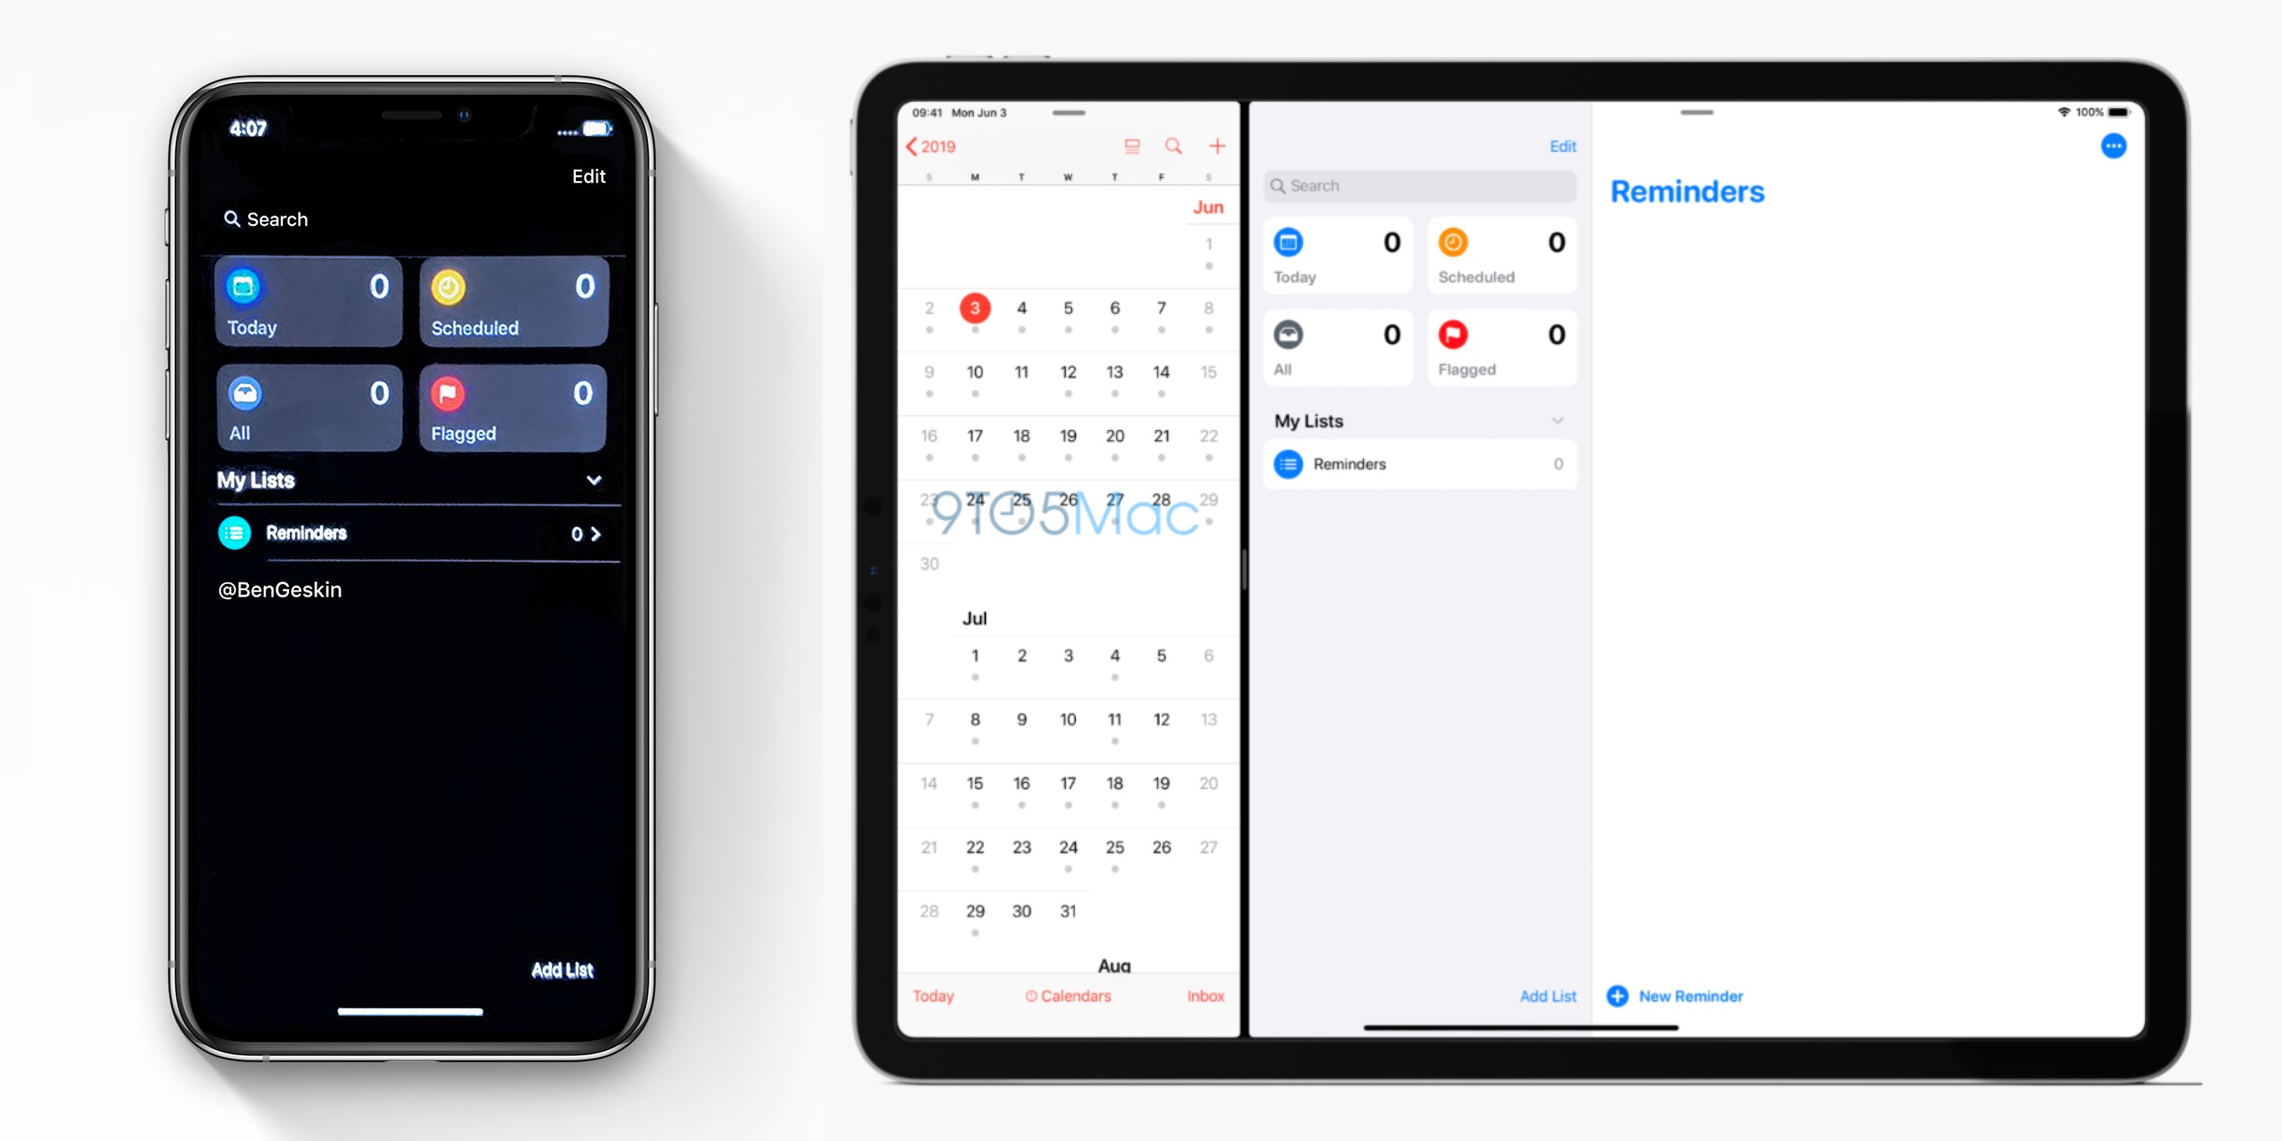 iOS 13 screenshot: Redesigned Reminders app for iPhone pictured in Dark Mode ahead of WWDC unveiling - 9to5Mac